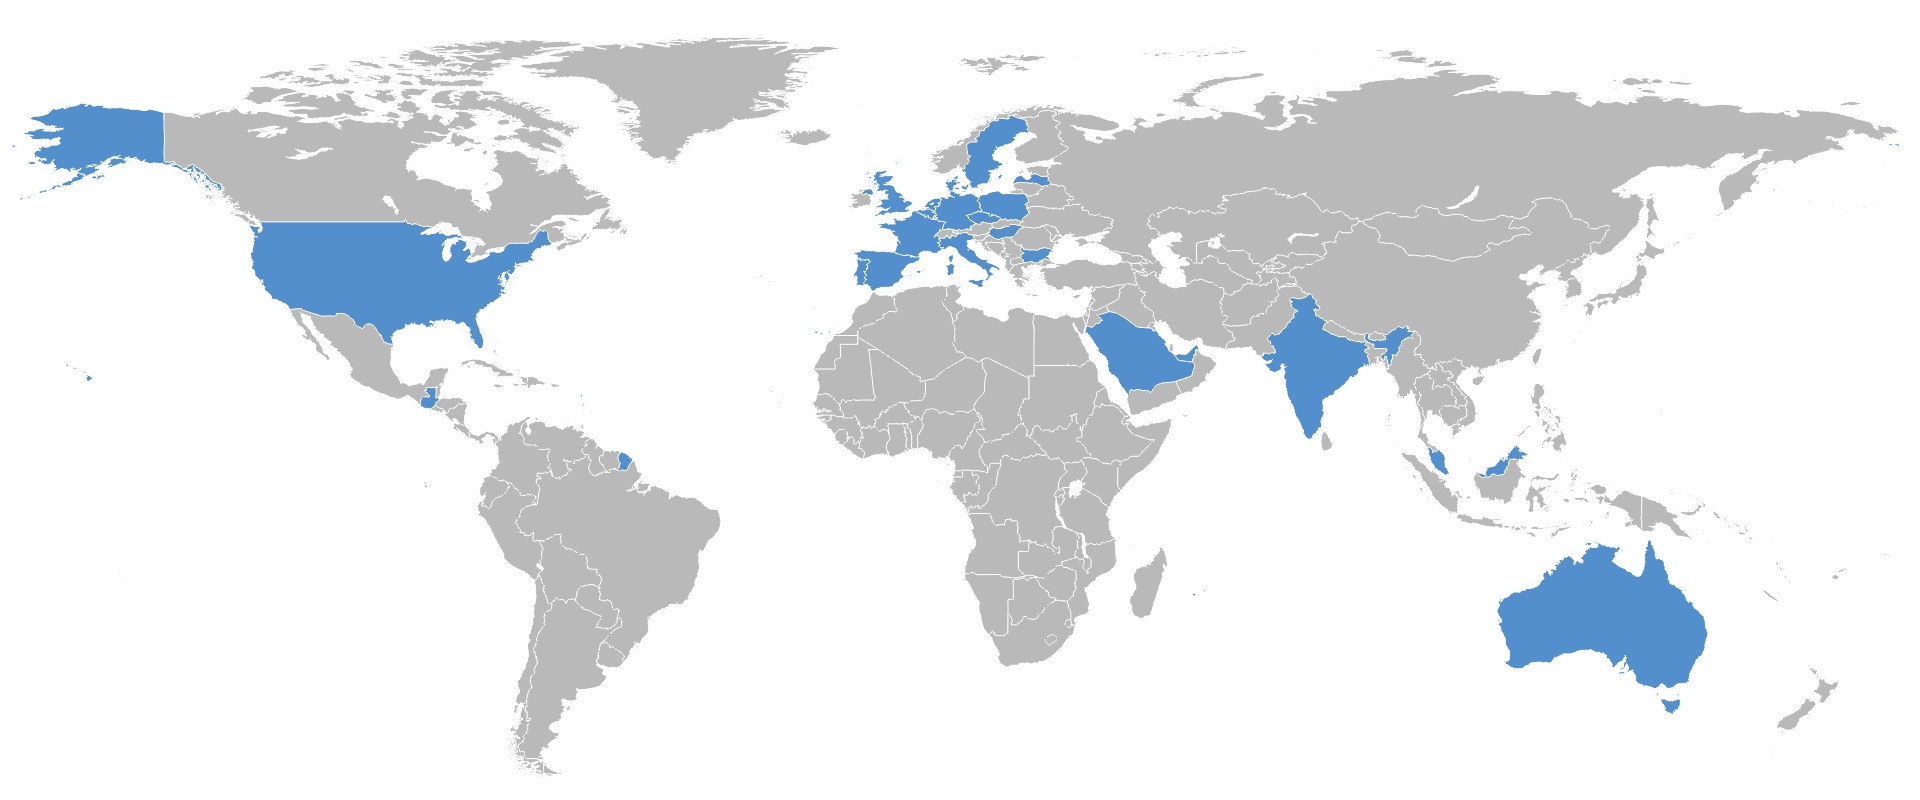 List of countries of clients